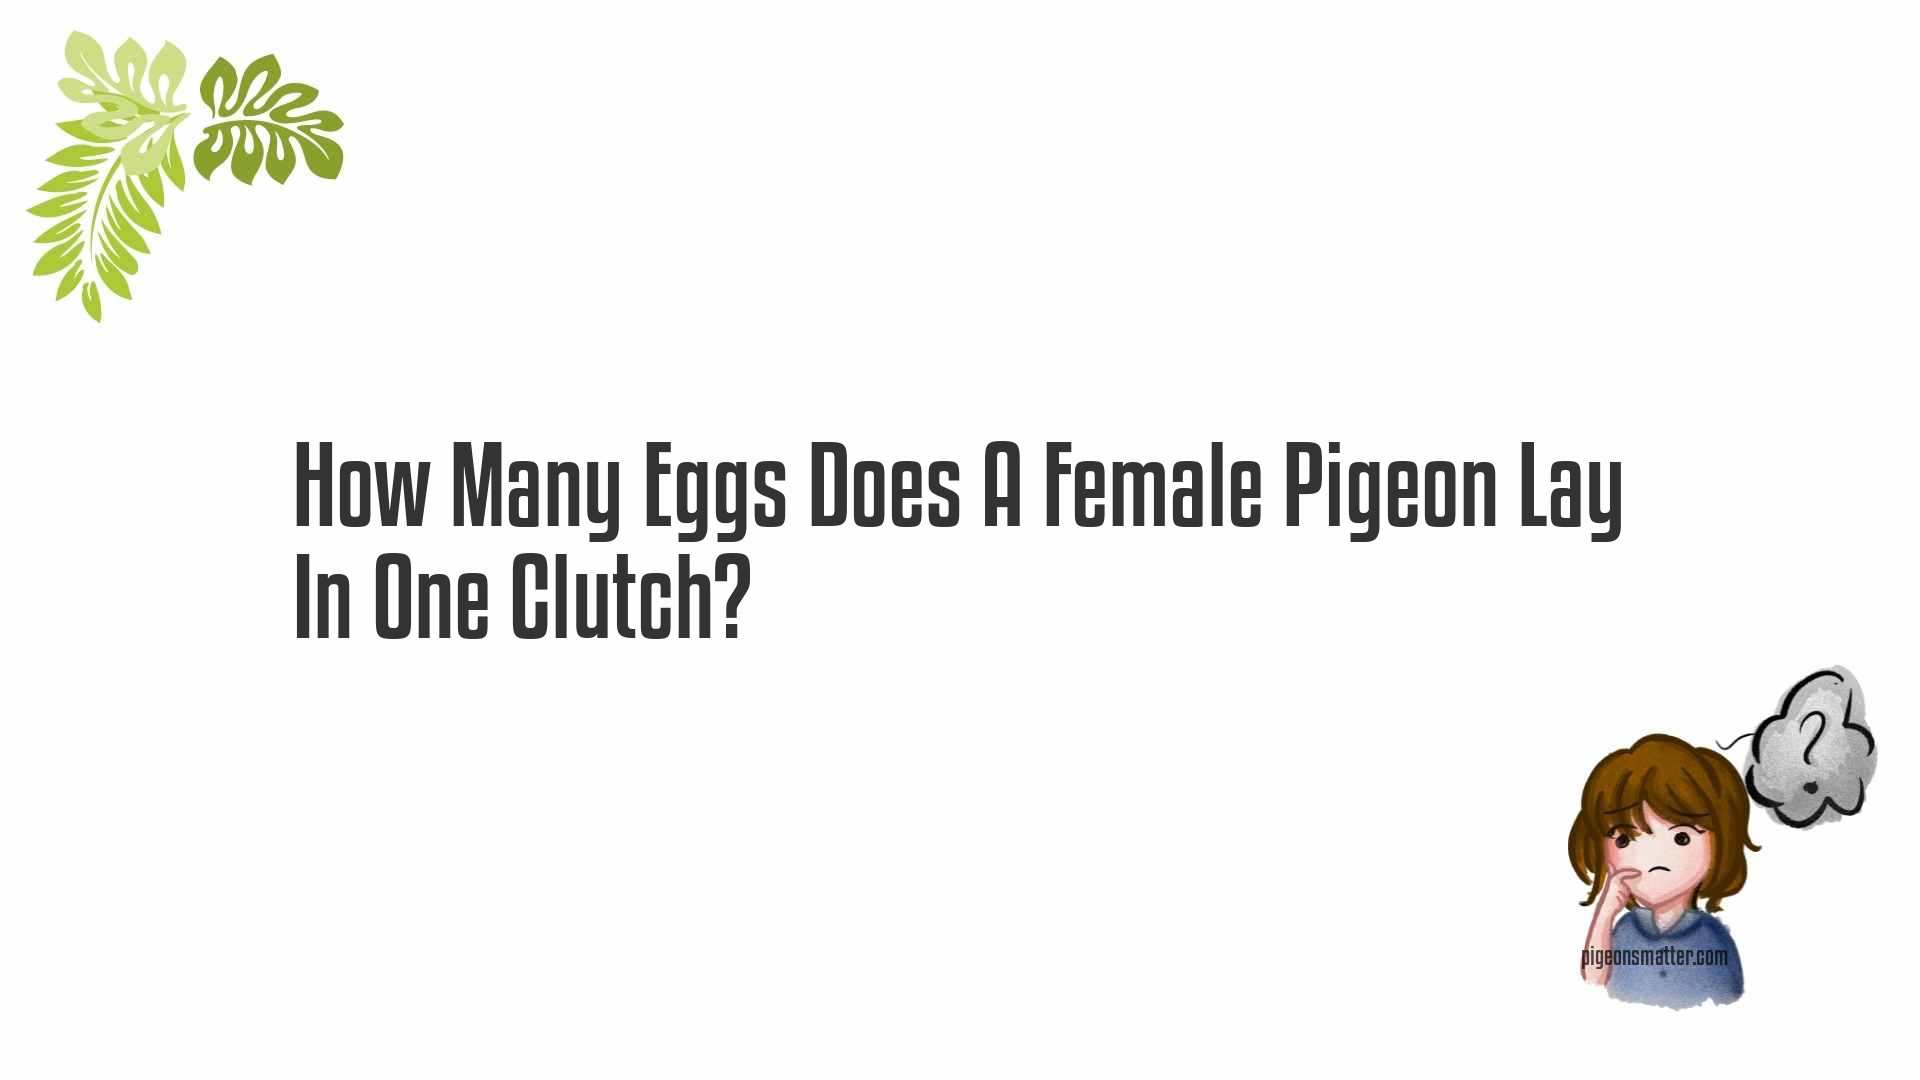 How Many Eggs Does A Female Pigeon Lay In One Clutch?